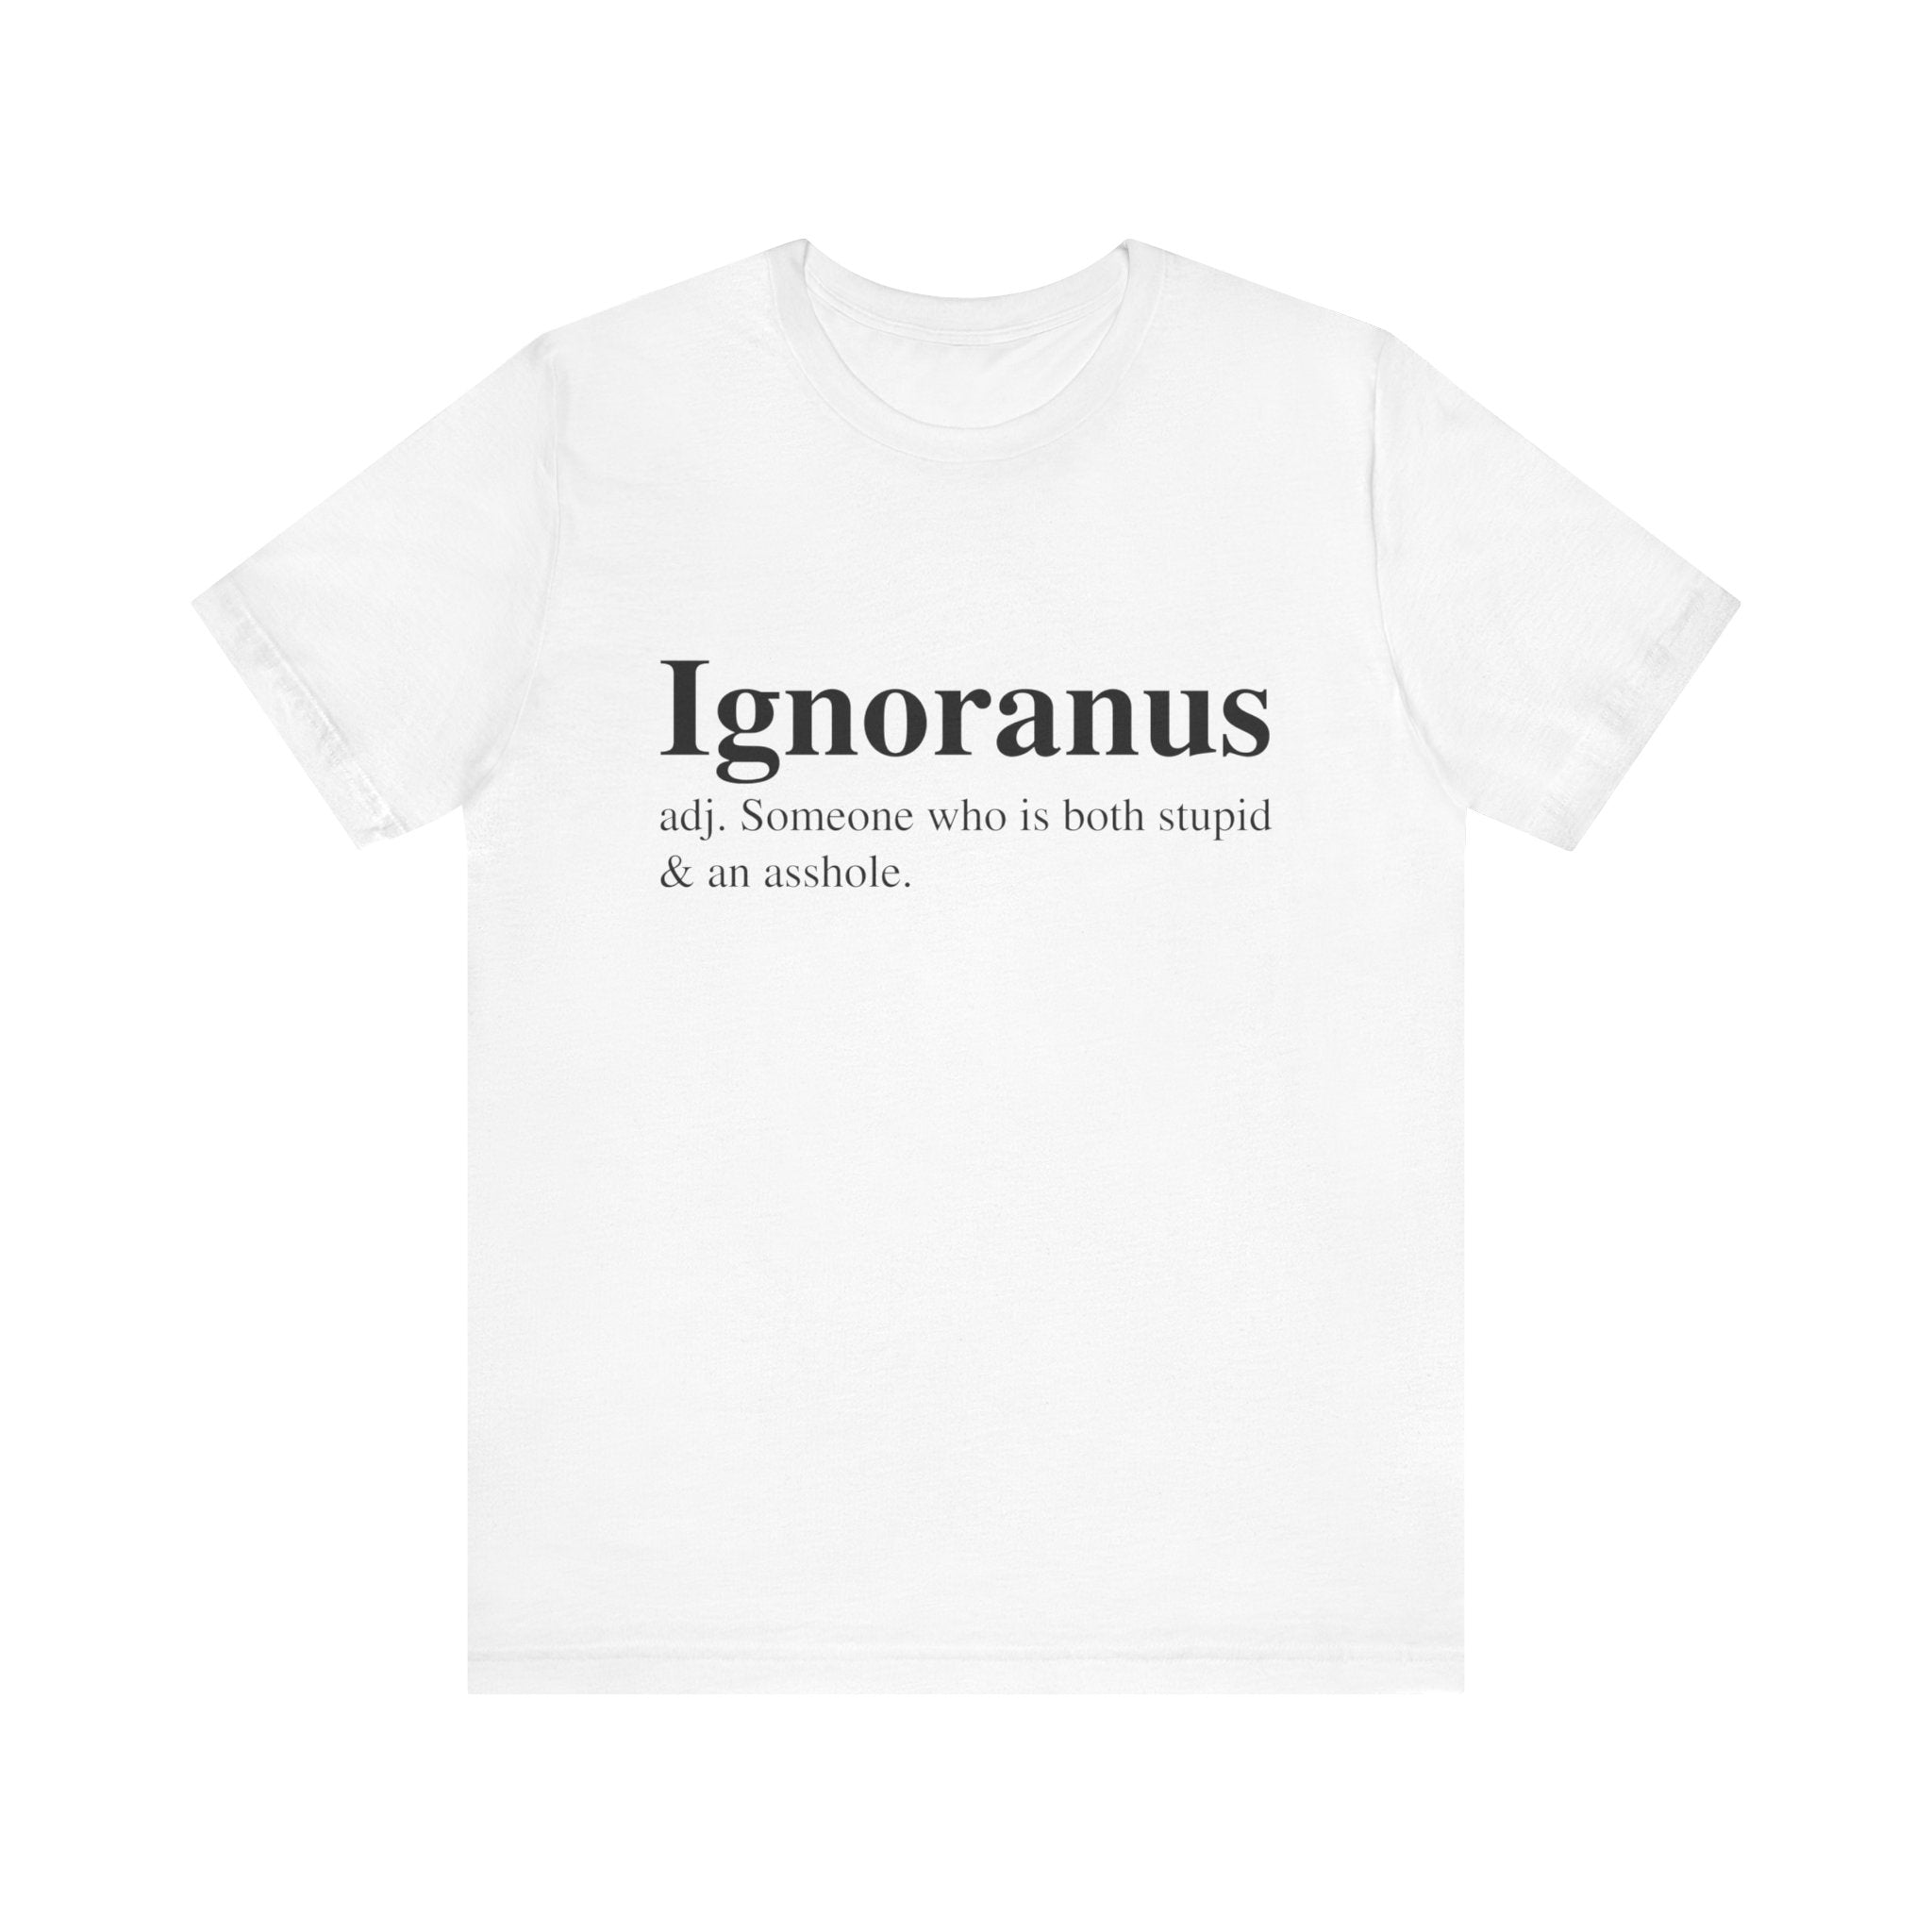 Sentence with replaced product name: Ignoranus T-Shirt with the word "Ignoranus" and its definition "adj. someone who is both stupid & an asshole" printed in black text on the front.